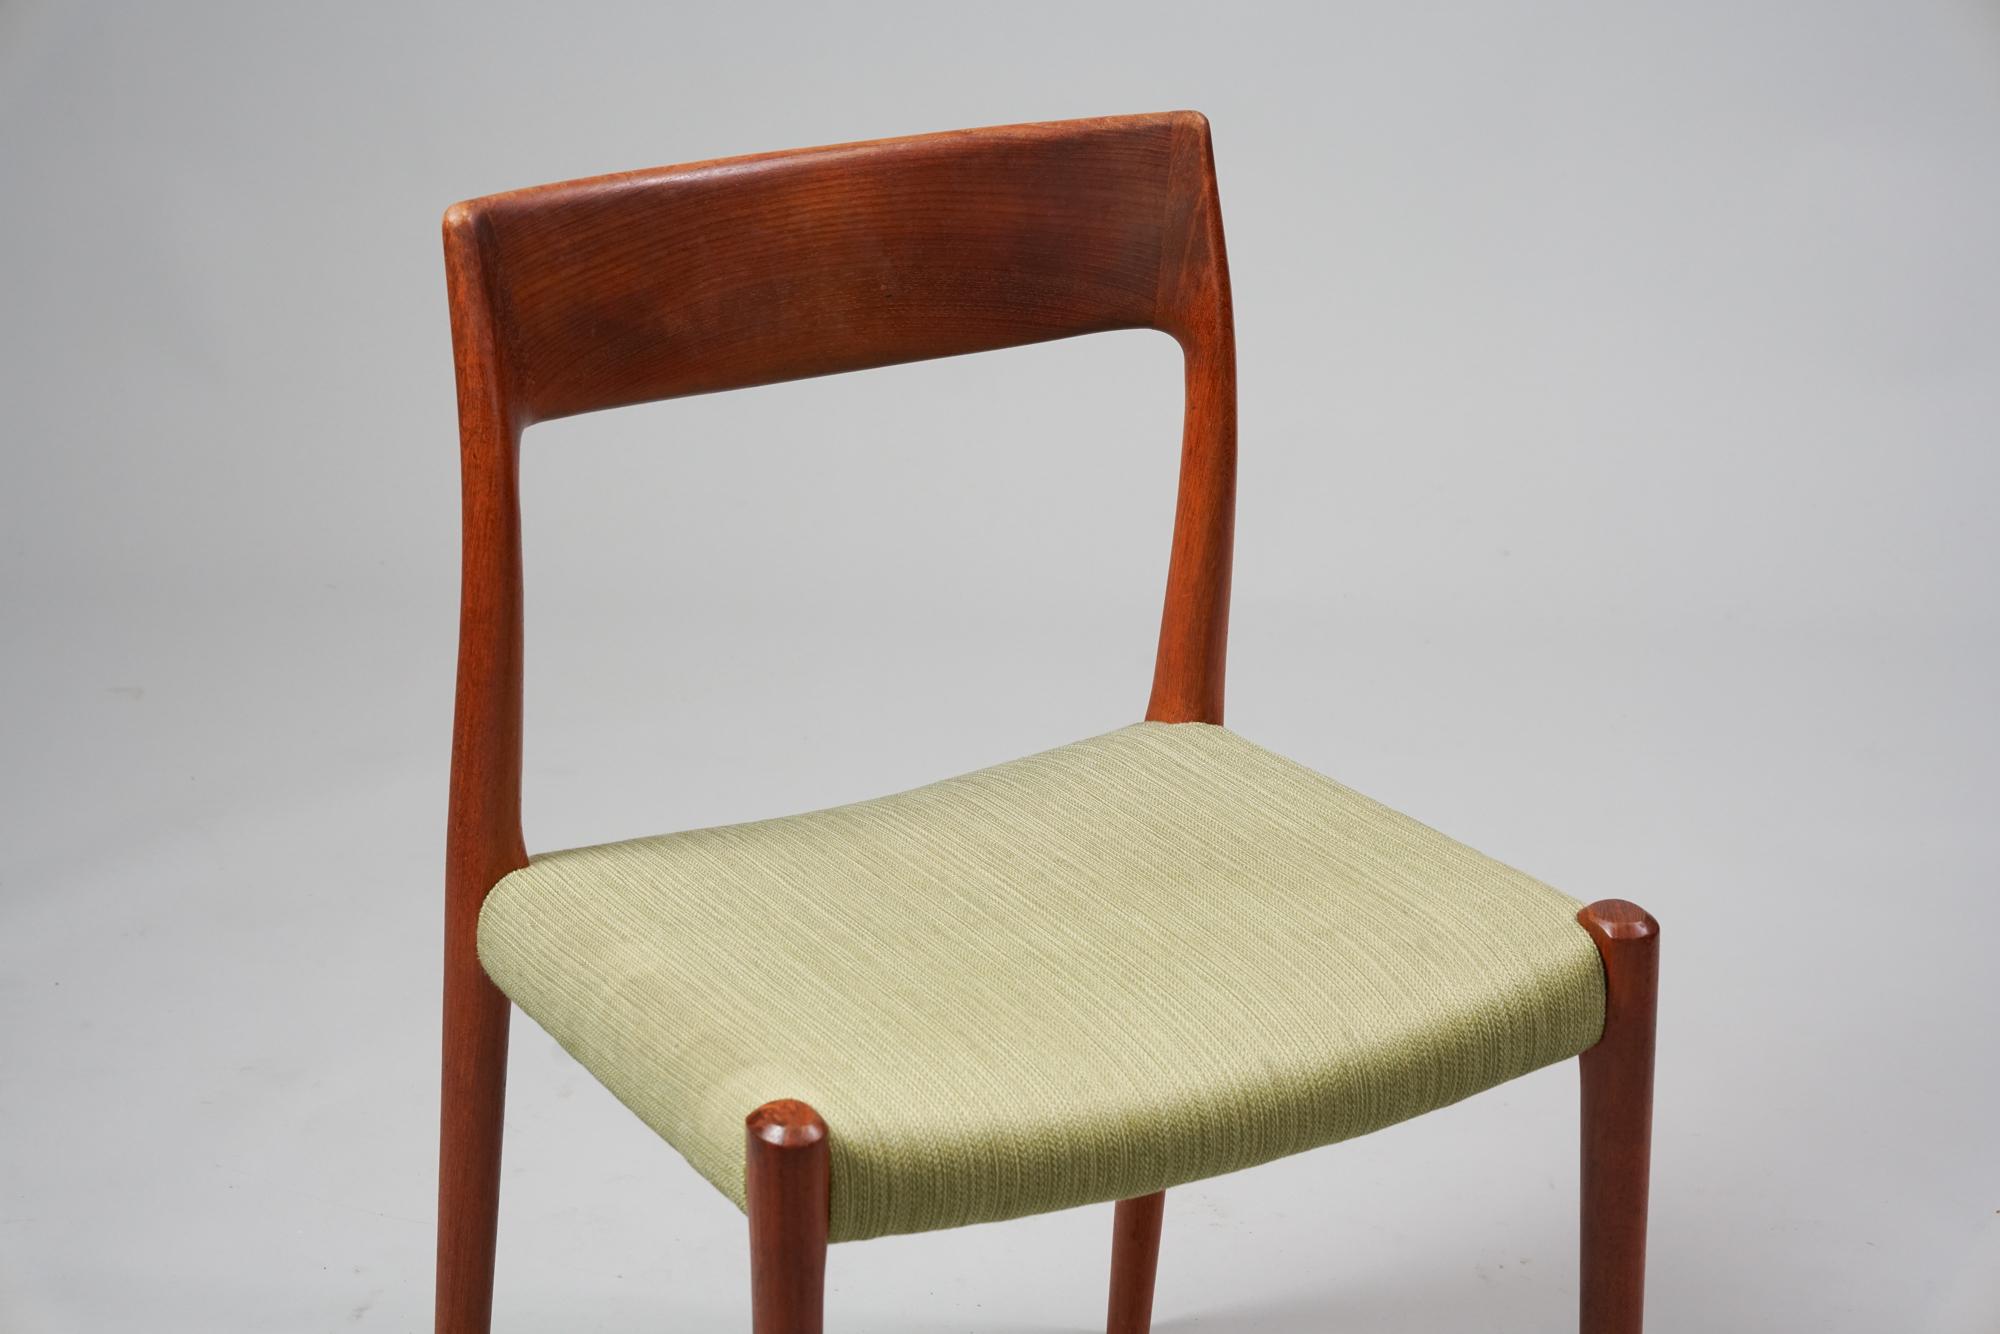 Set of six model 77 dining room chairs designed by Niels O. Møller from the 1960s. Teak frame with fabric upholstery, Good vintage condition, minor patina and wear consistent with age and use. The chairs are sold as a set. 

Born in Århus in 1920,